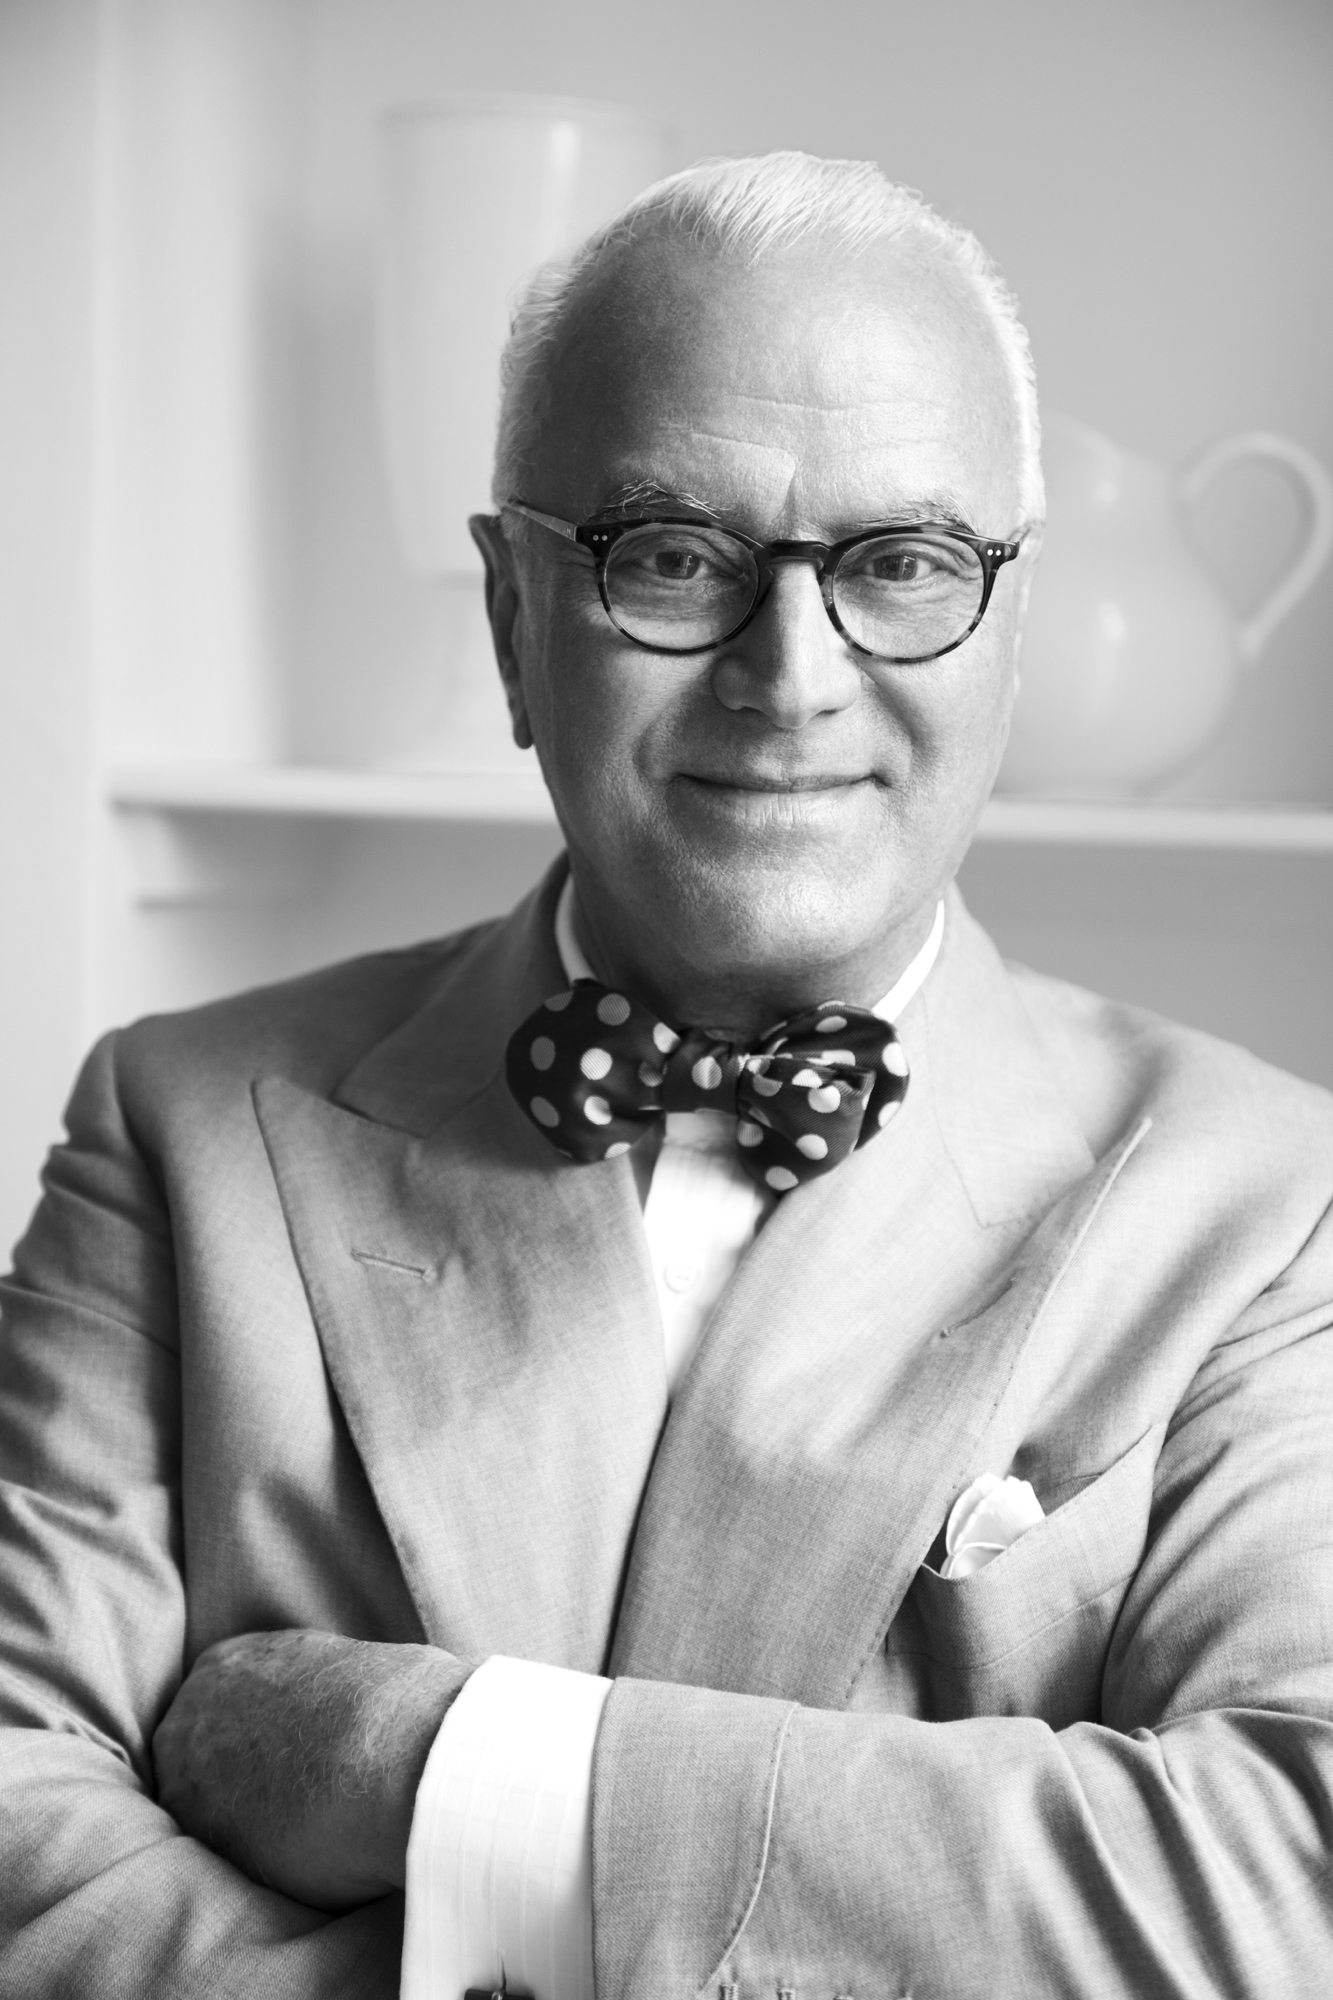 Manolo Blahnik is as colourful as his shoes